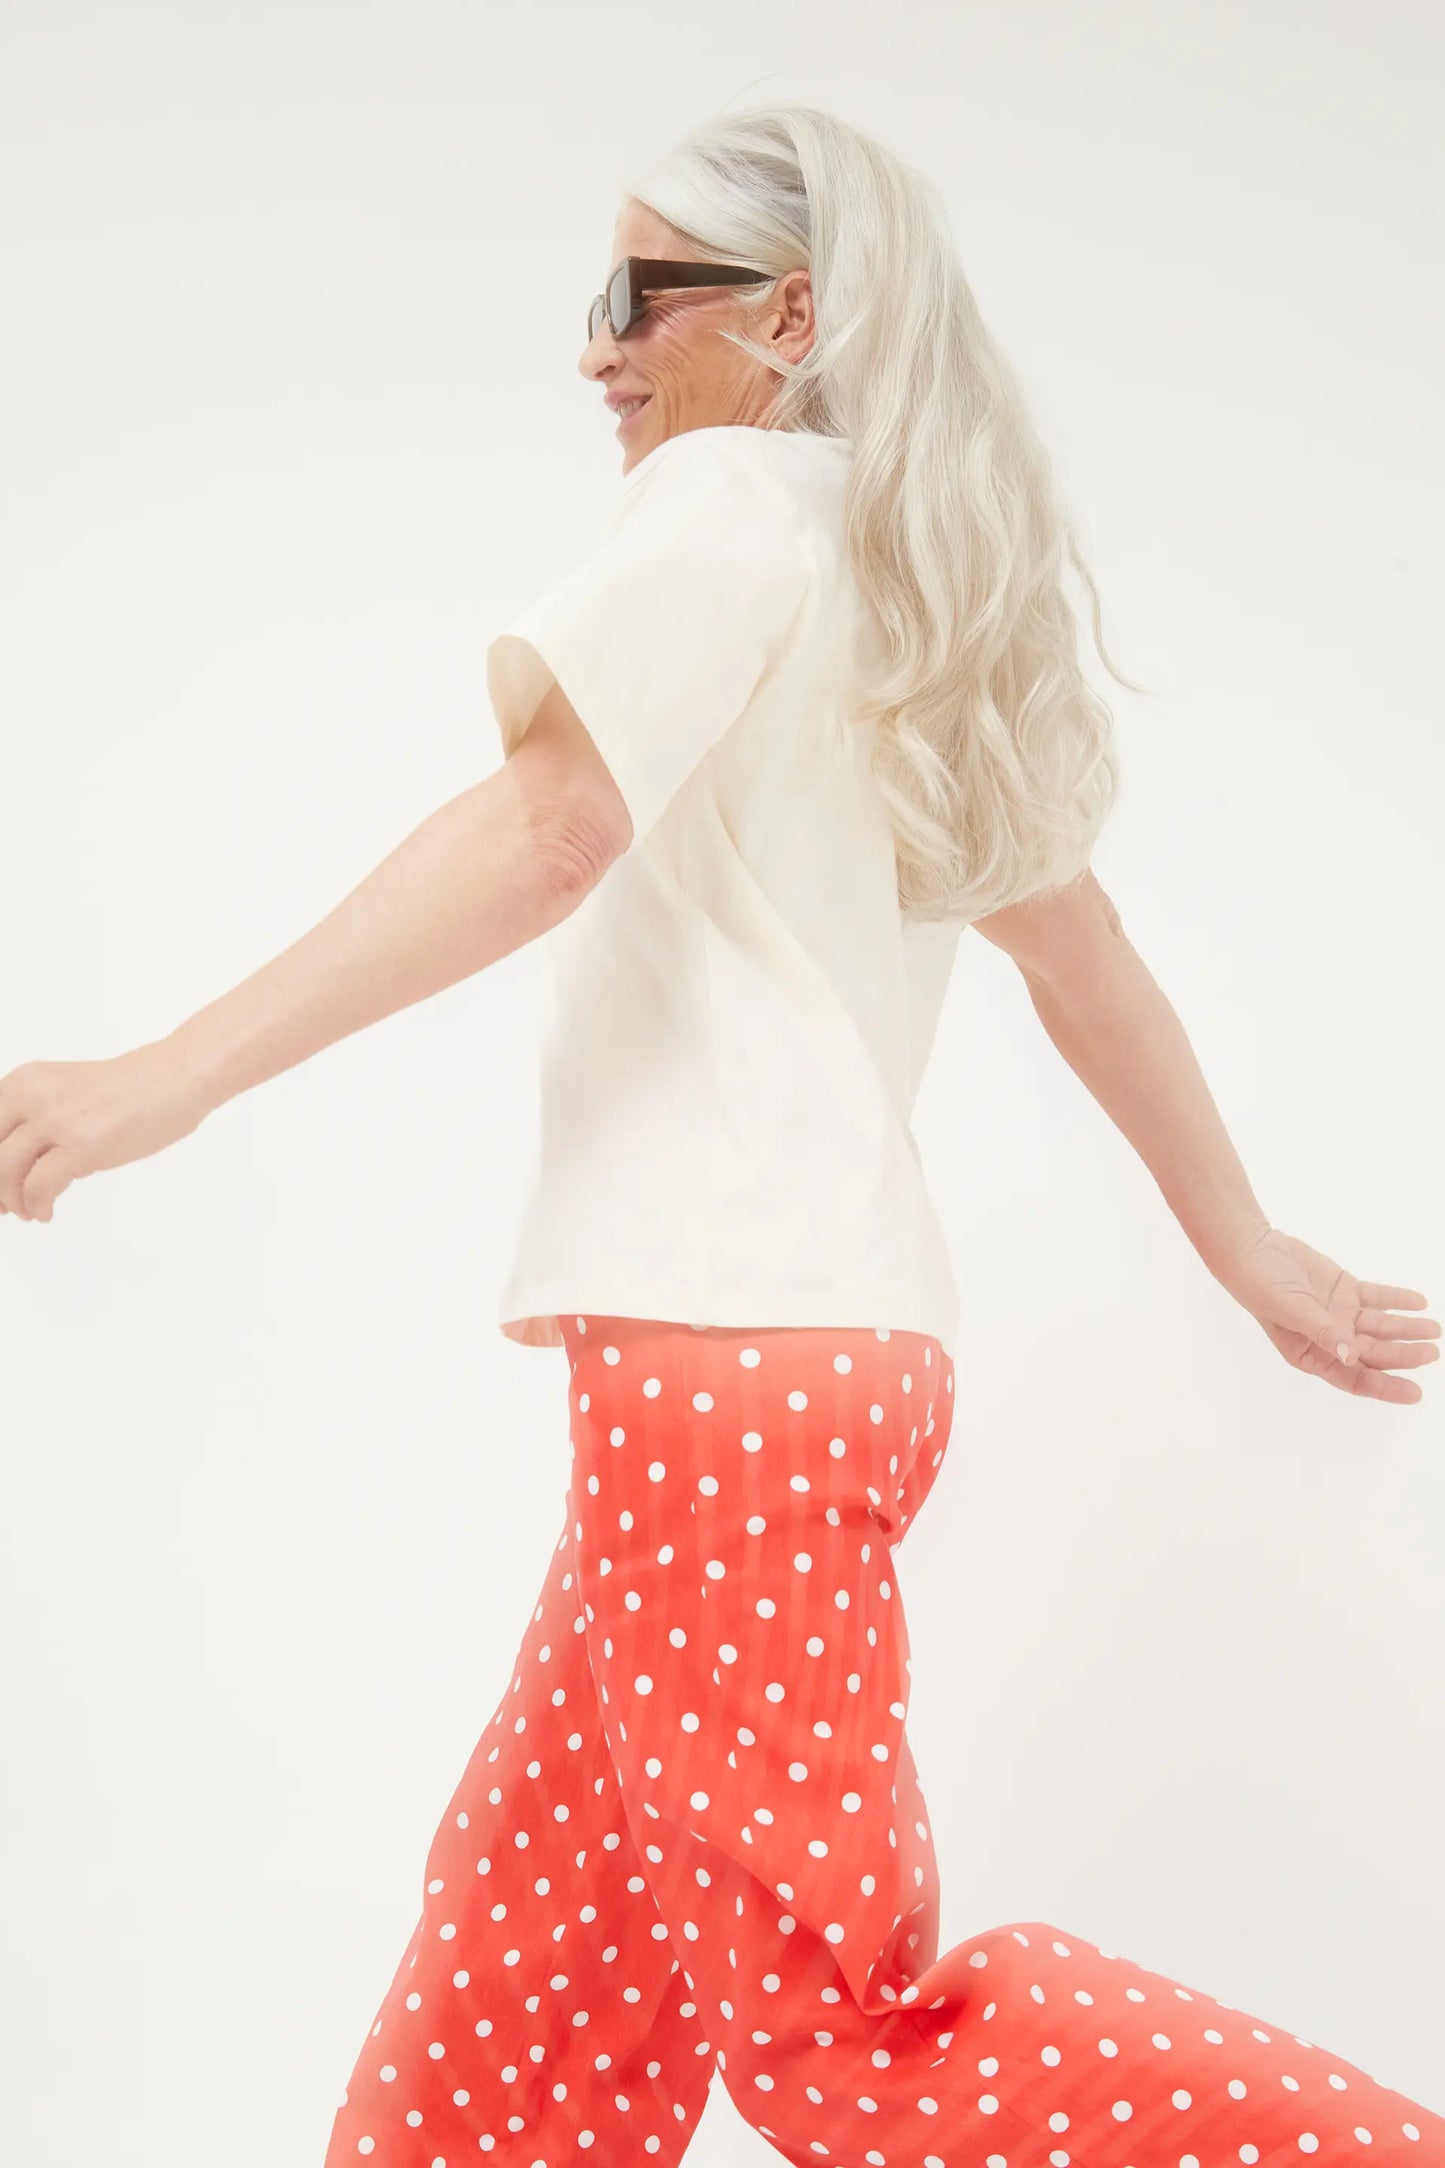 Red polka dot straight jeans